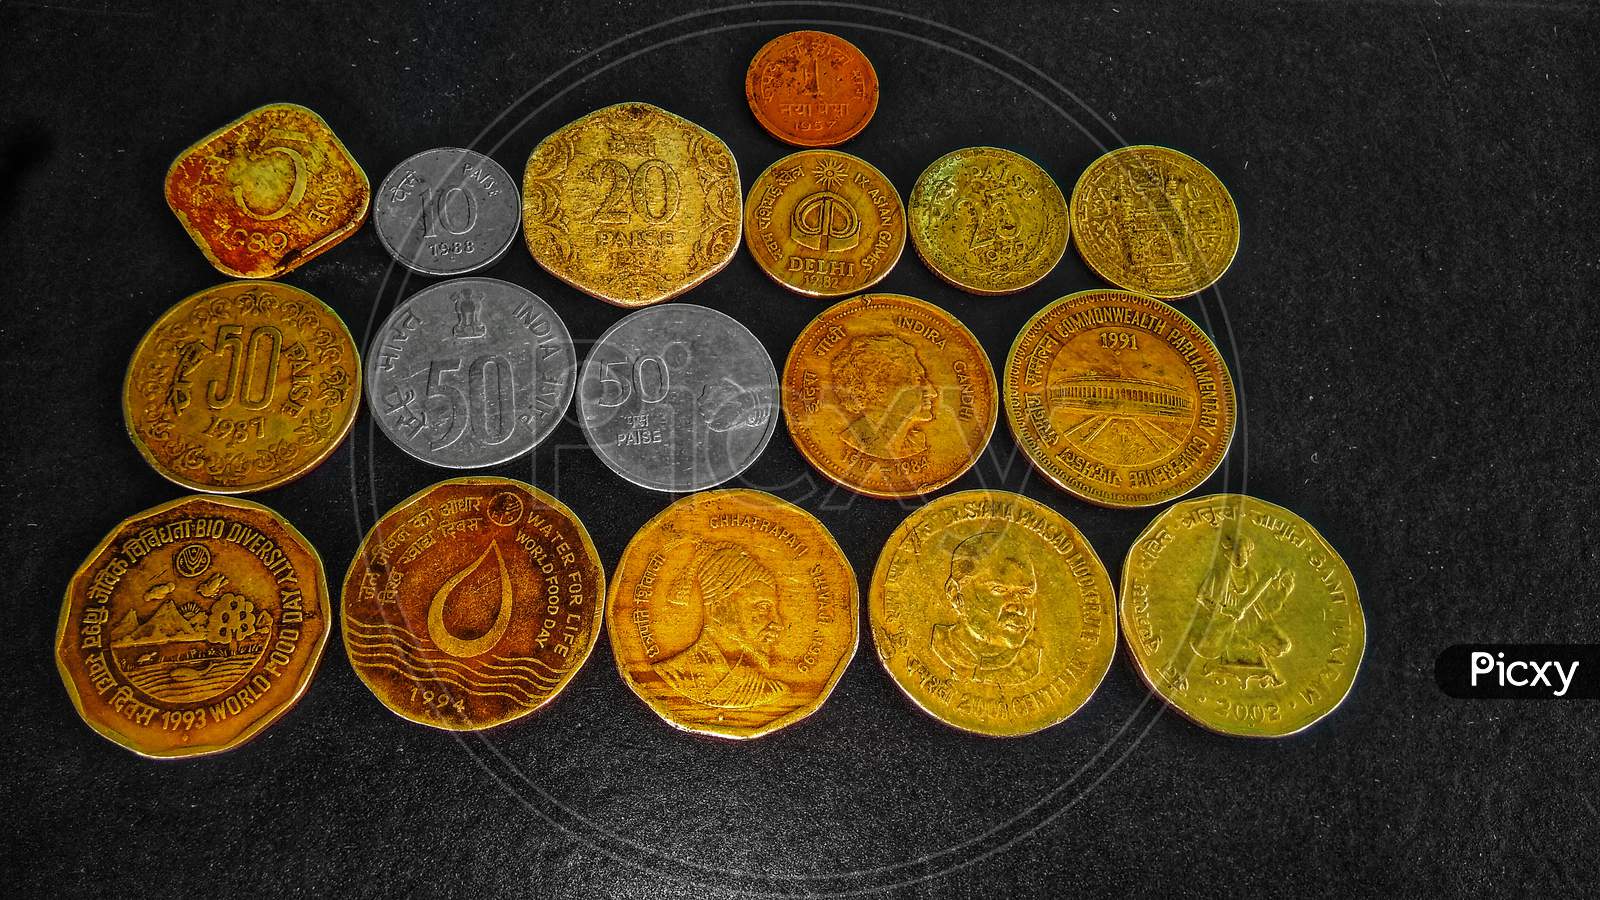 All Indian old coins